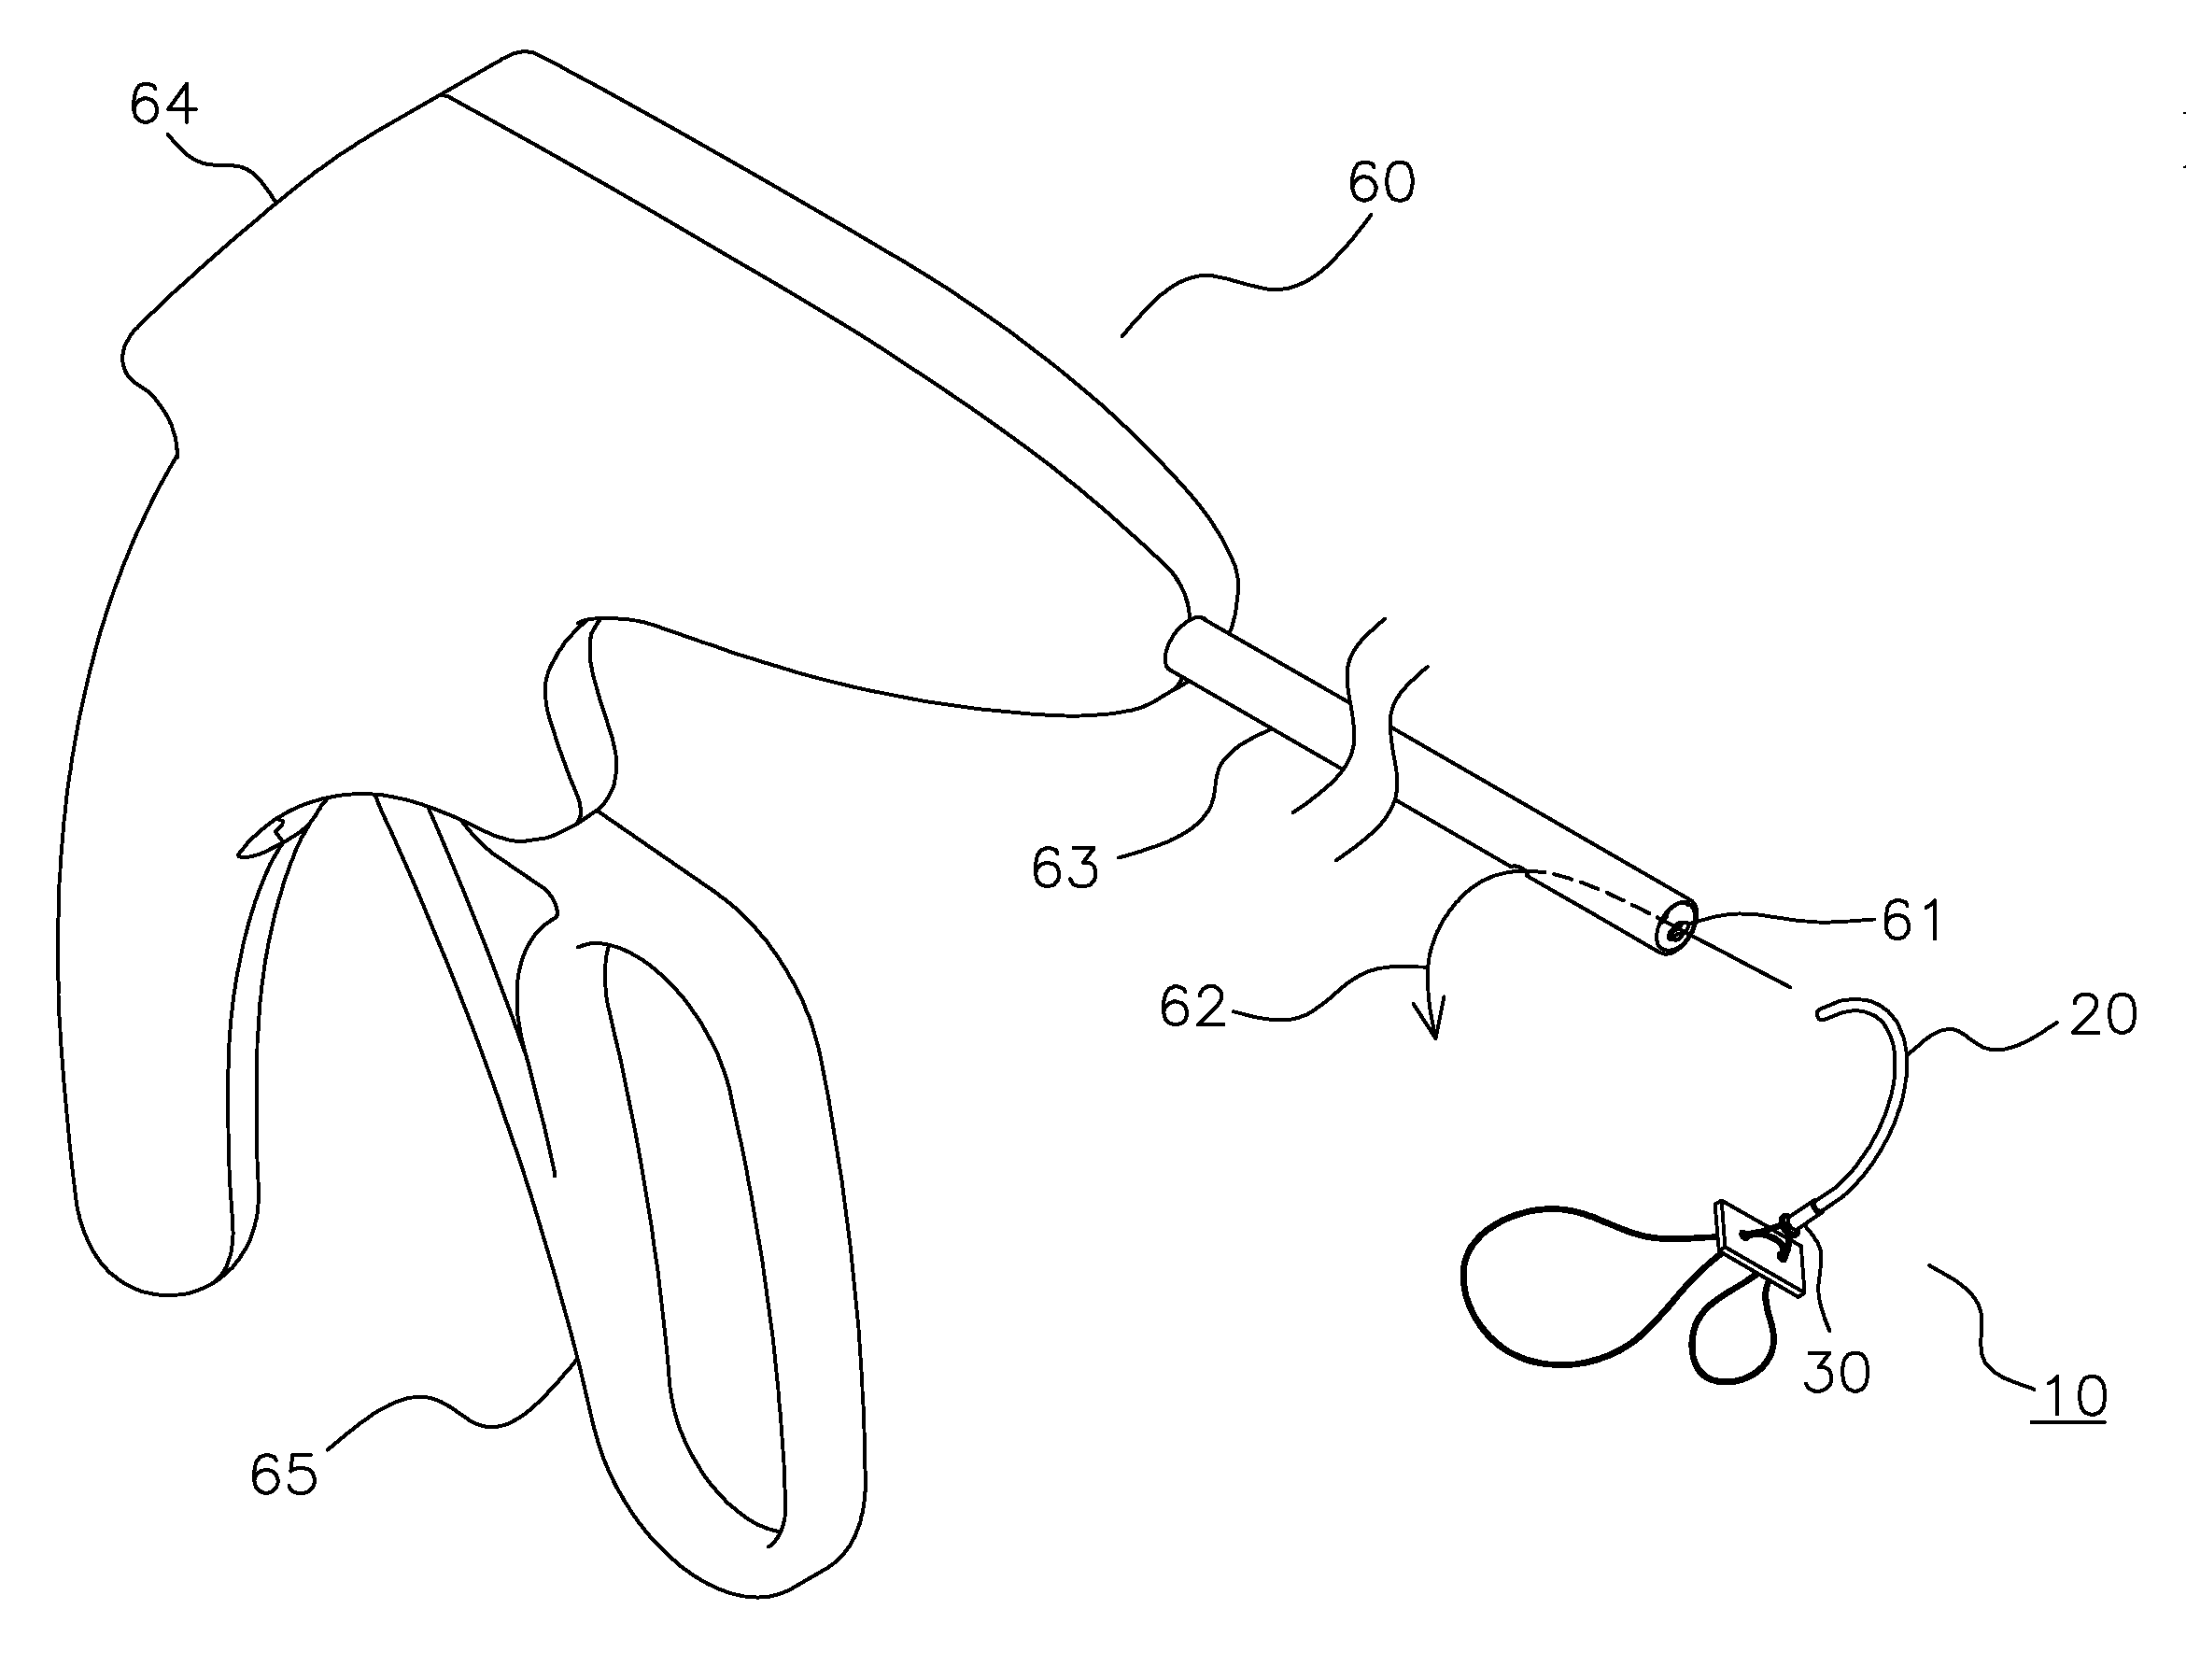 Multiple loop device for passing suture tails through a surgical pledget